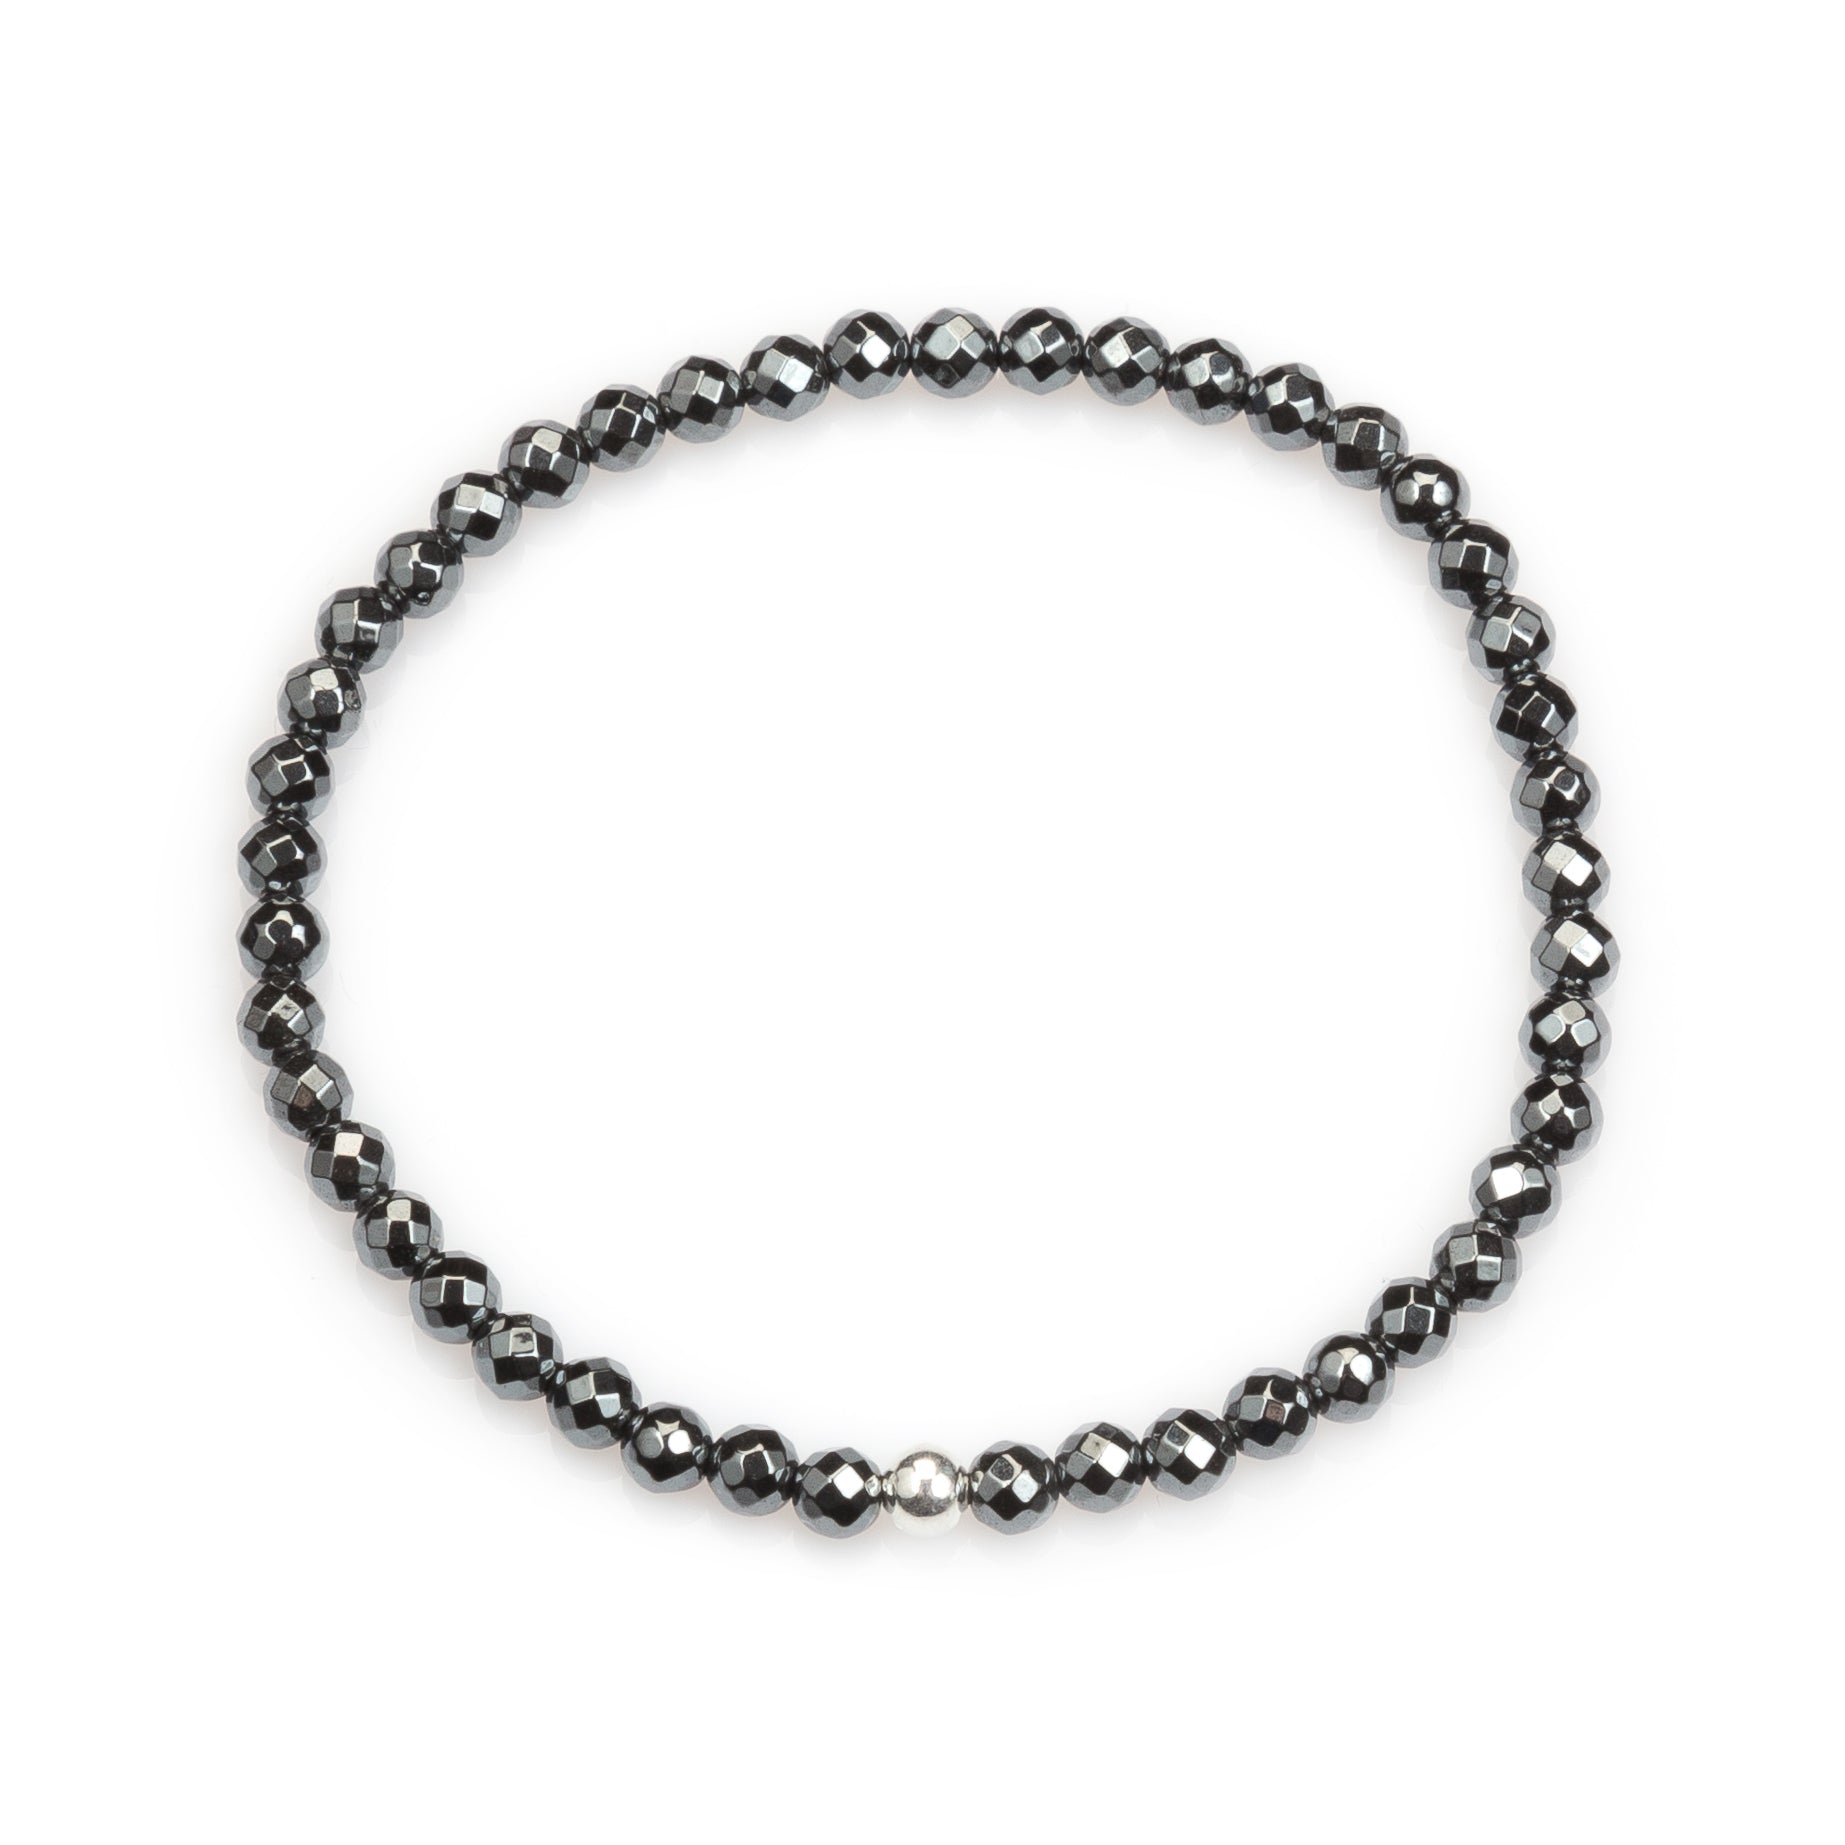 Faceted Hematite Bracelet with Silver Ball Bead